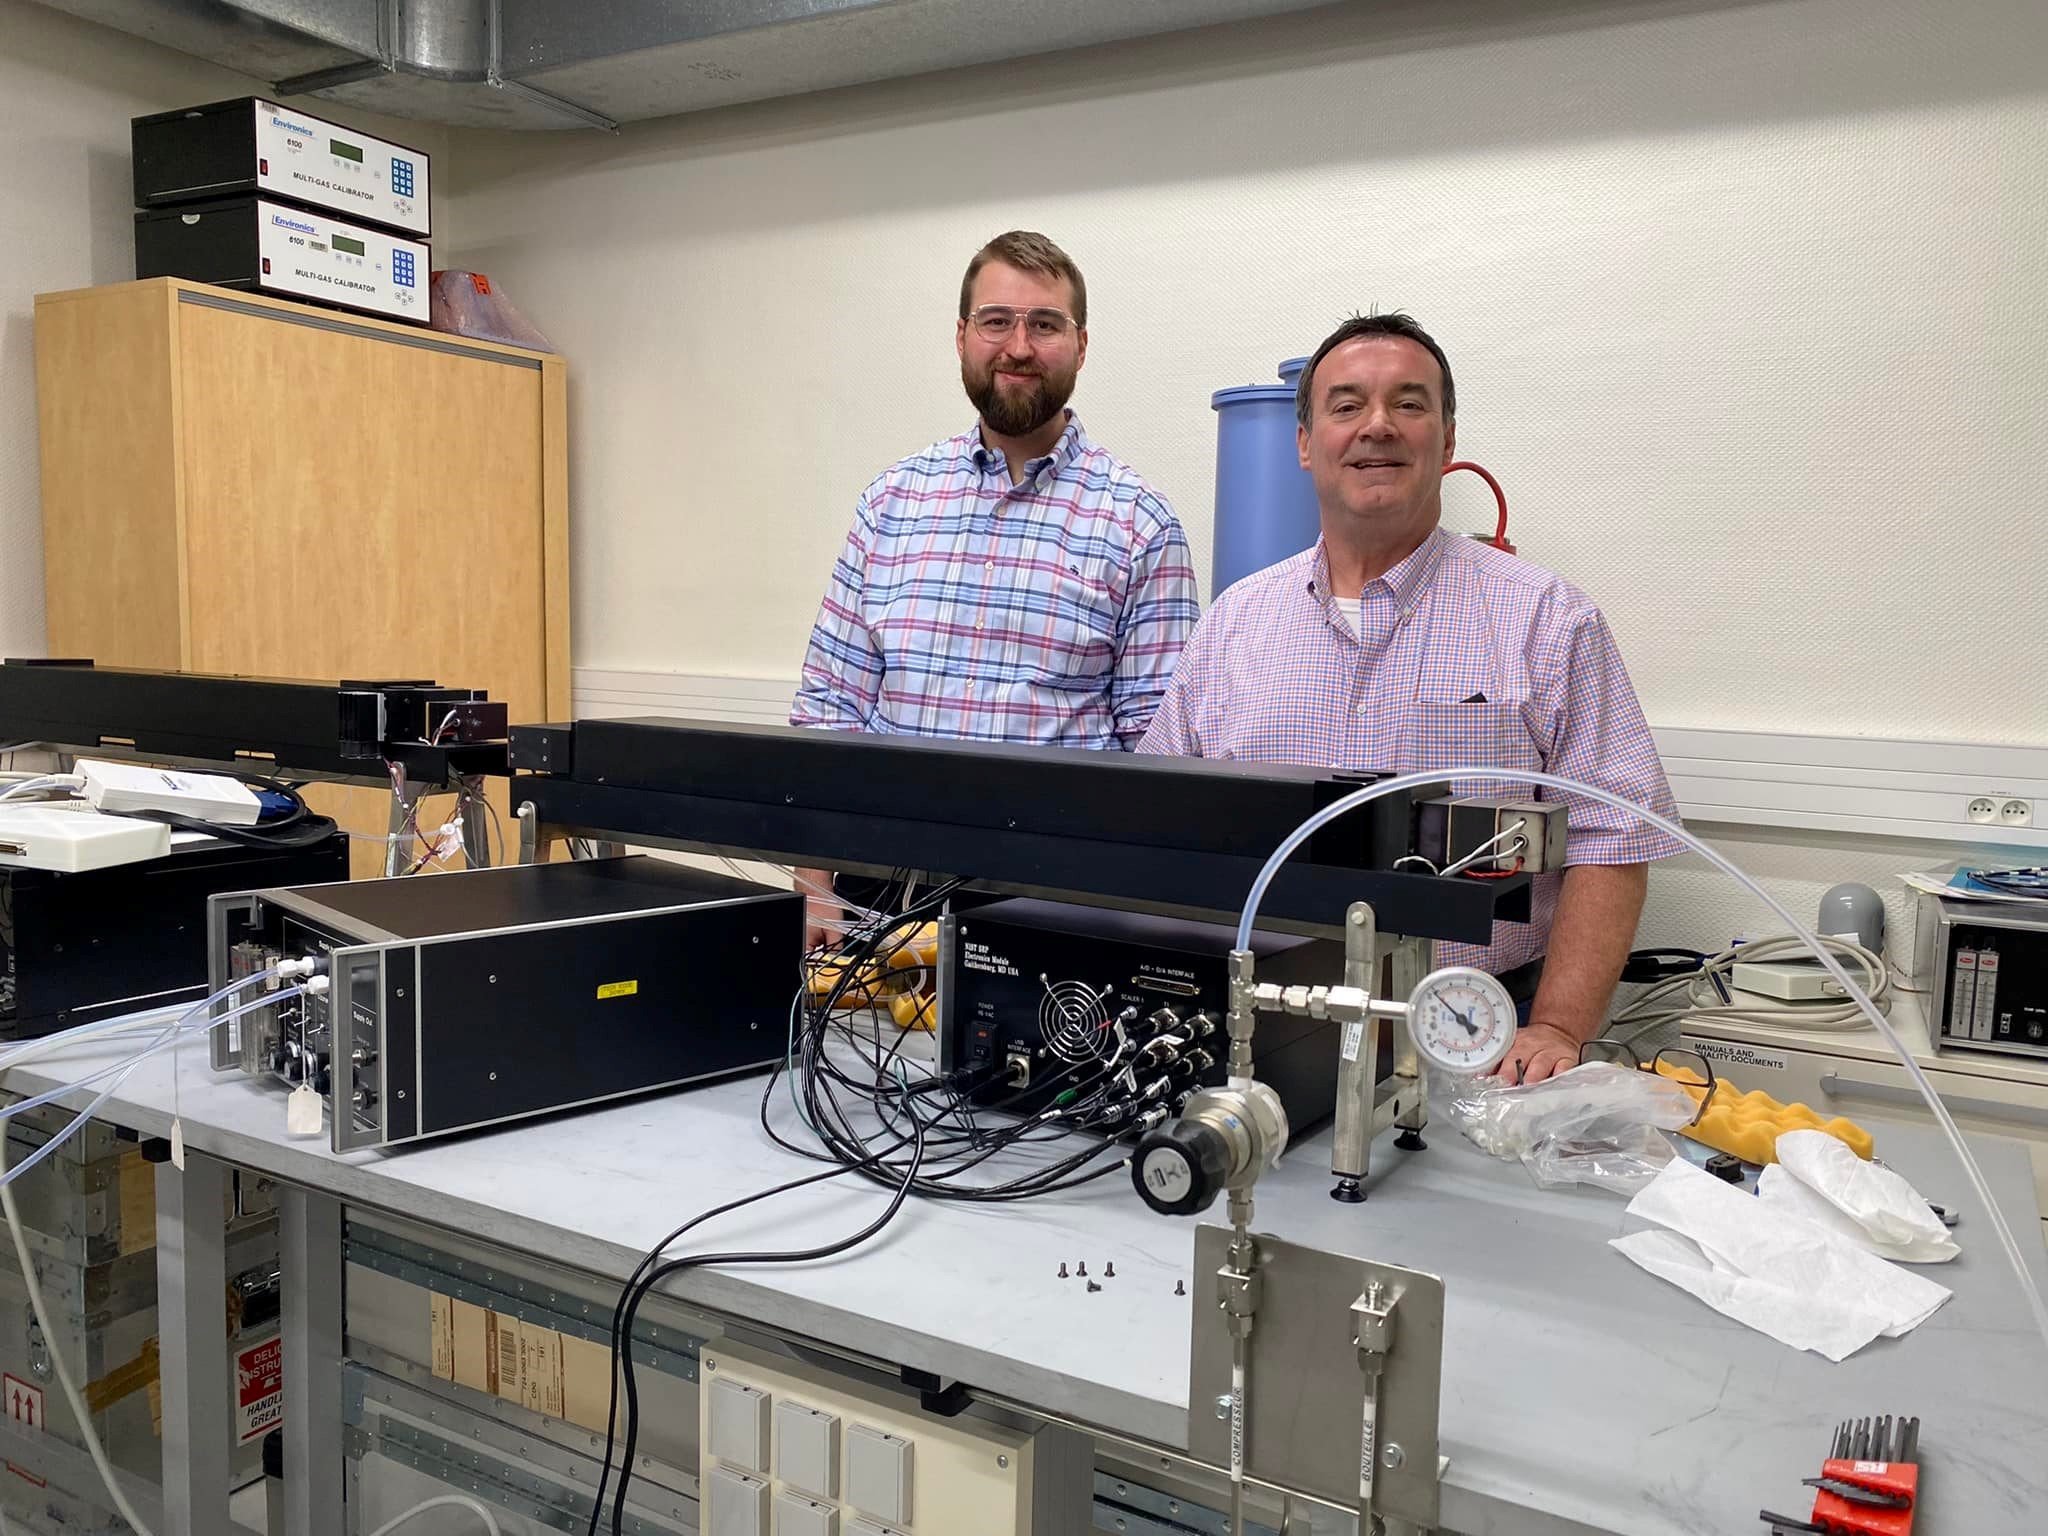 Peter Trask and Jim Norris stand behind a table where components of the Standard Reference Photometer are arrayed in black cases connected by wires. 